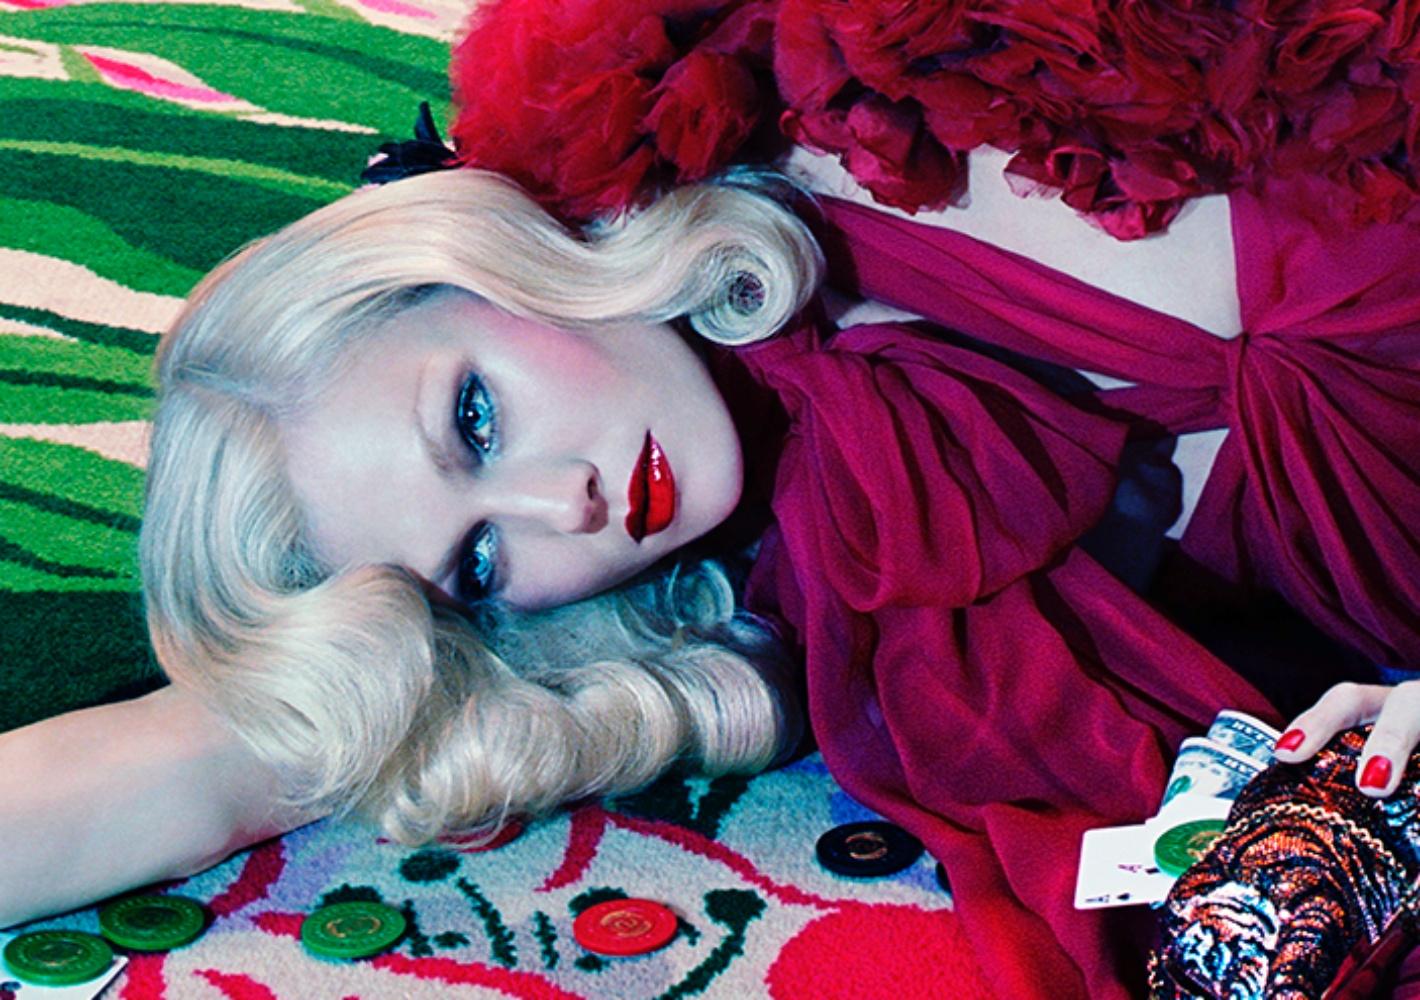 The Rooms #2 – Miles Aldridge, Woman, Fashion, Glamour, Casino, Red, Deck, Cards For Sale 2